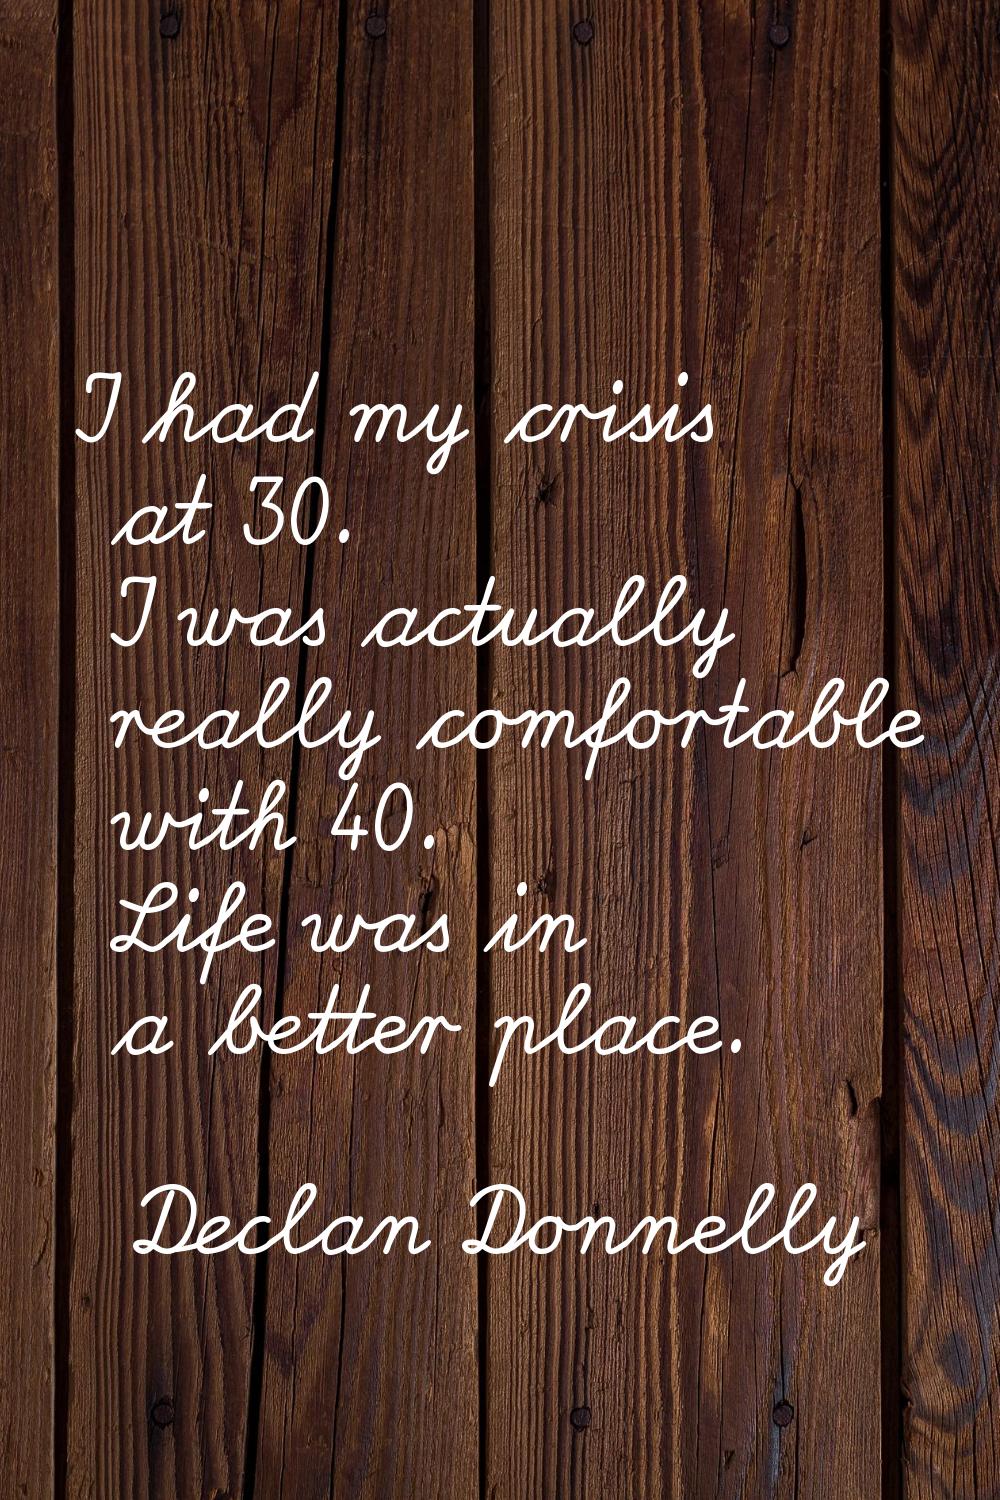 I had my crisis at 30. I was actually really comfortable with 40. Life was in a better place.